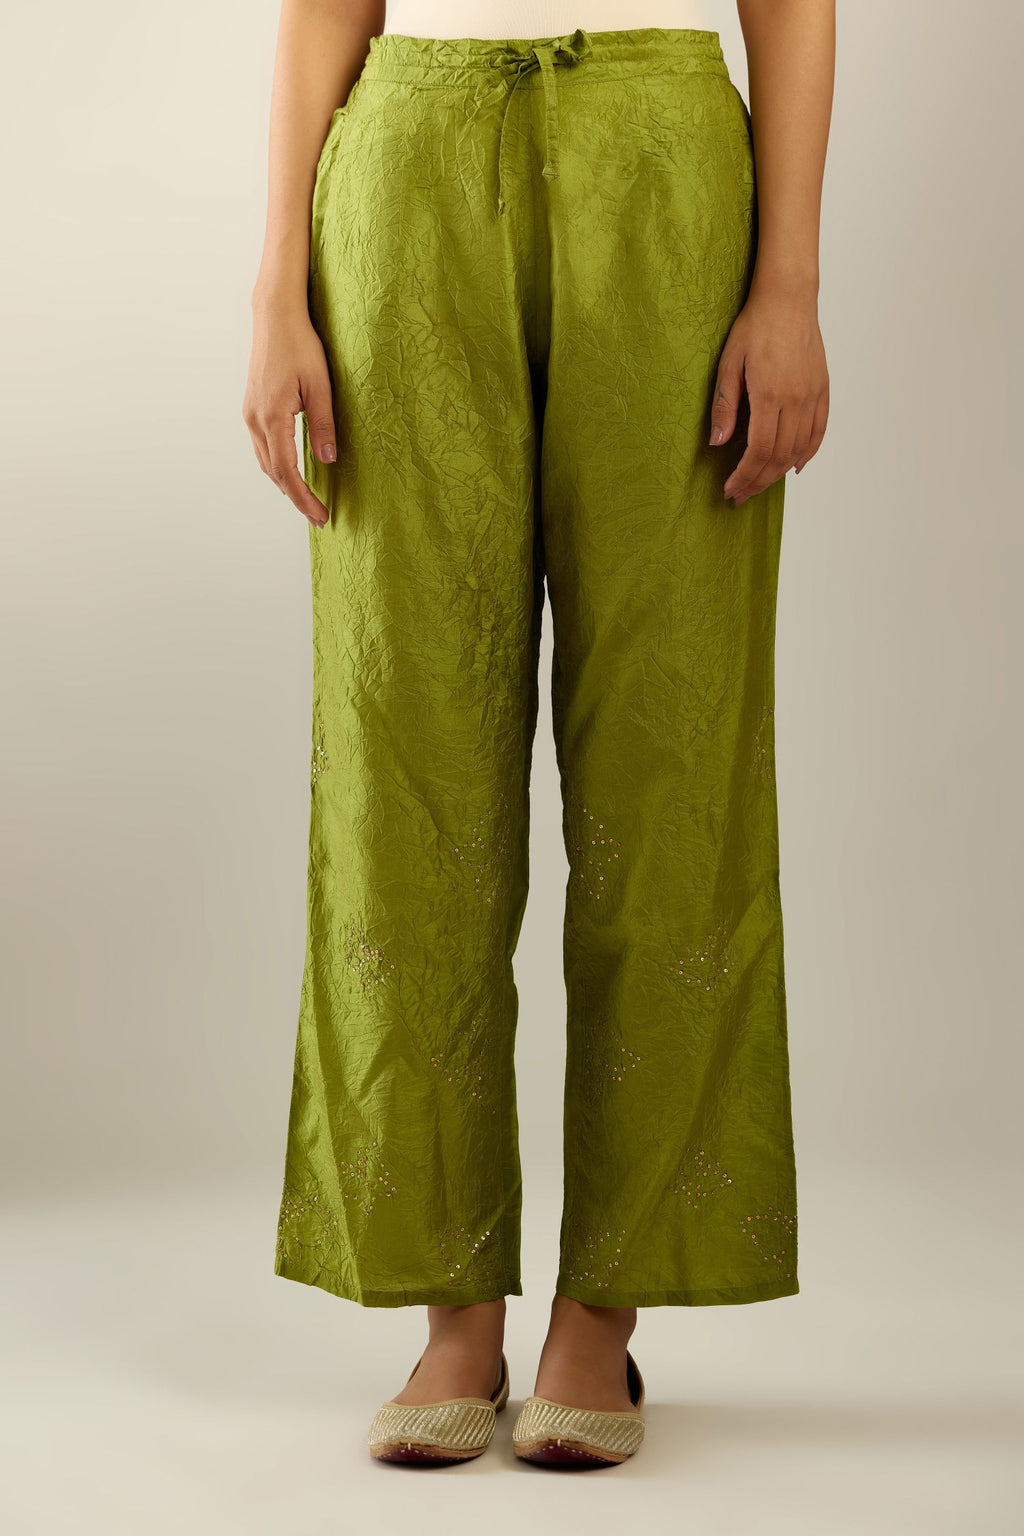 Apple green crushed silk pants with side pockets and assorted sequined butterflies till mid-calf length.